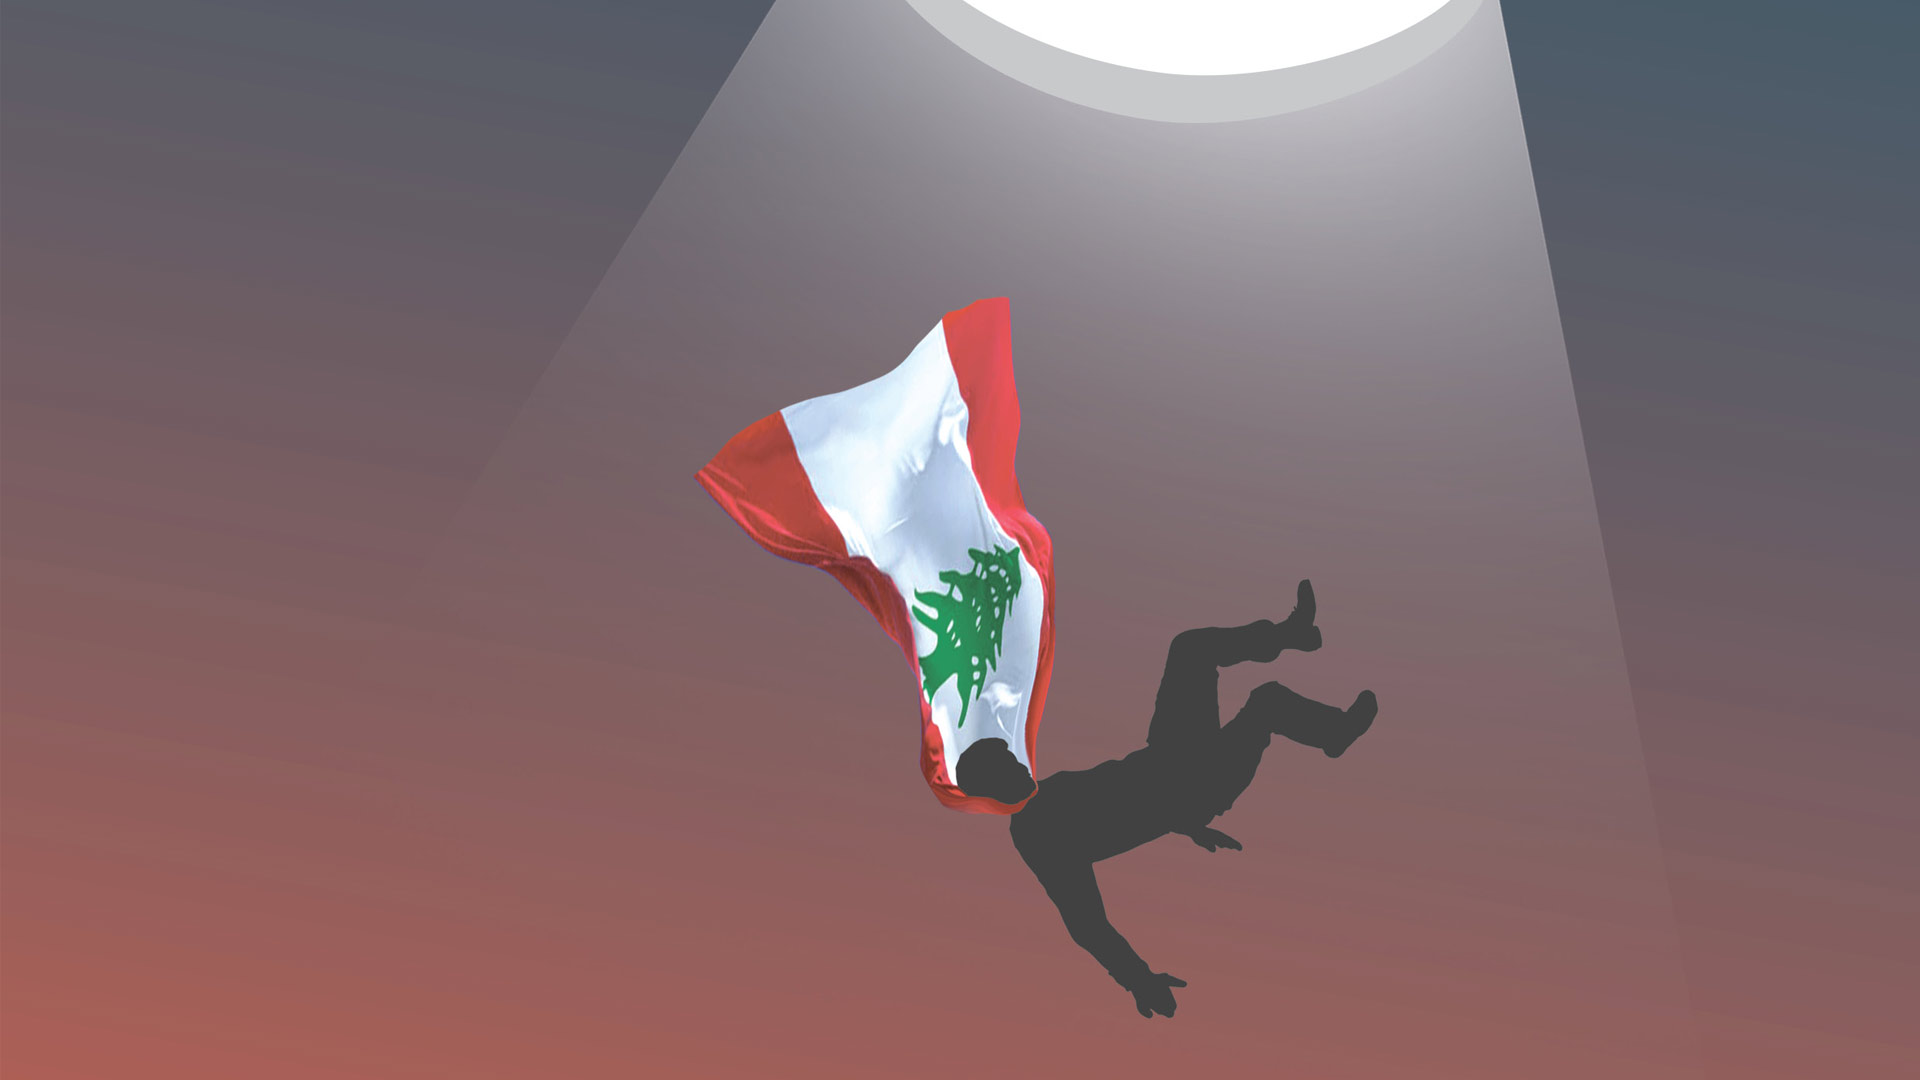 Plummet or Prosper: The Risks and Potential of Lebanon’s Productive Economy